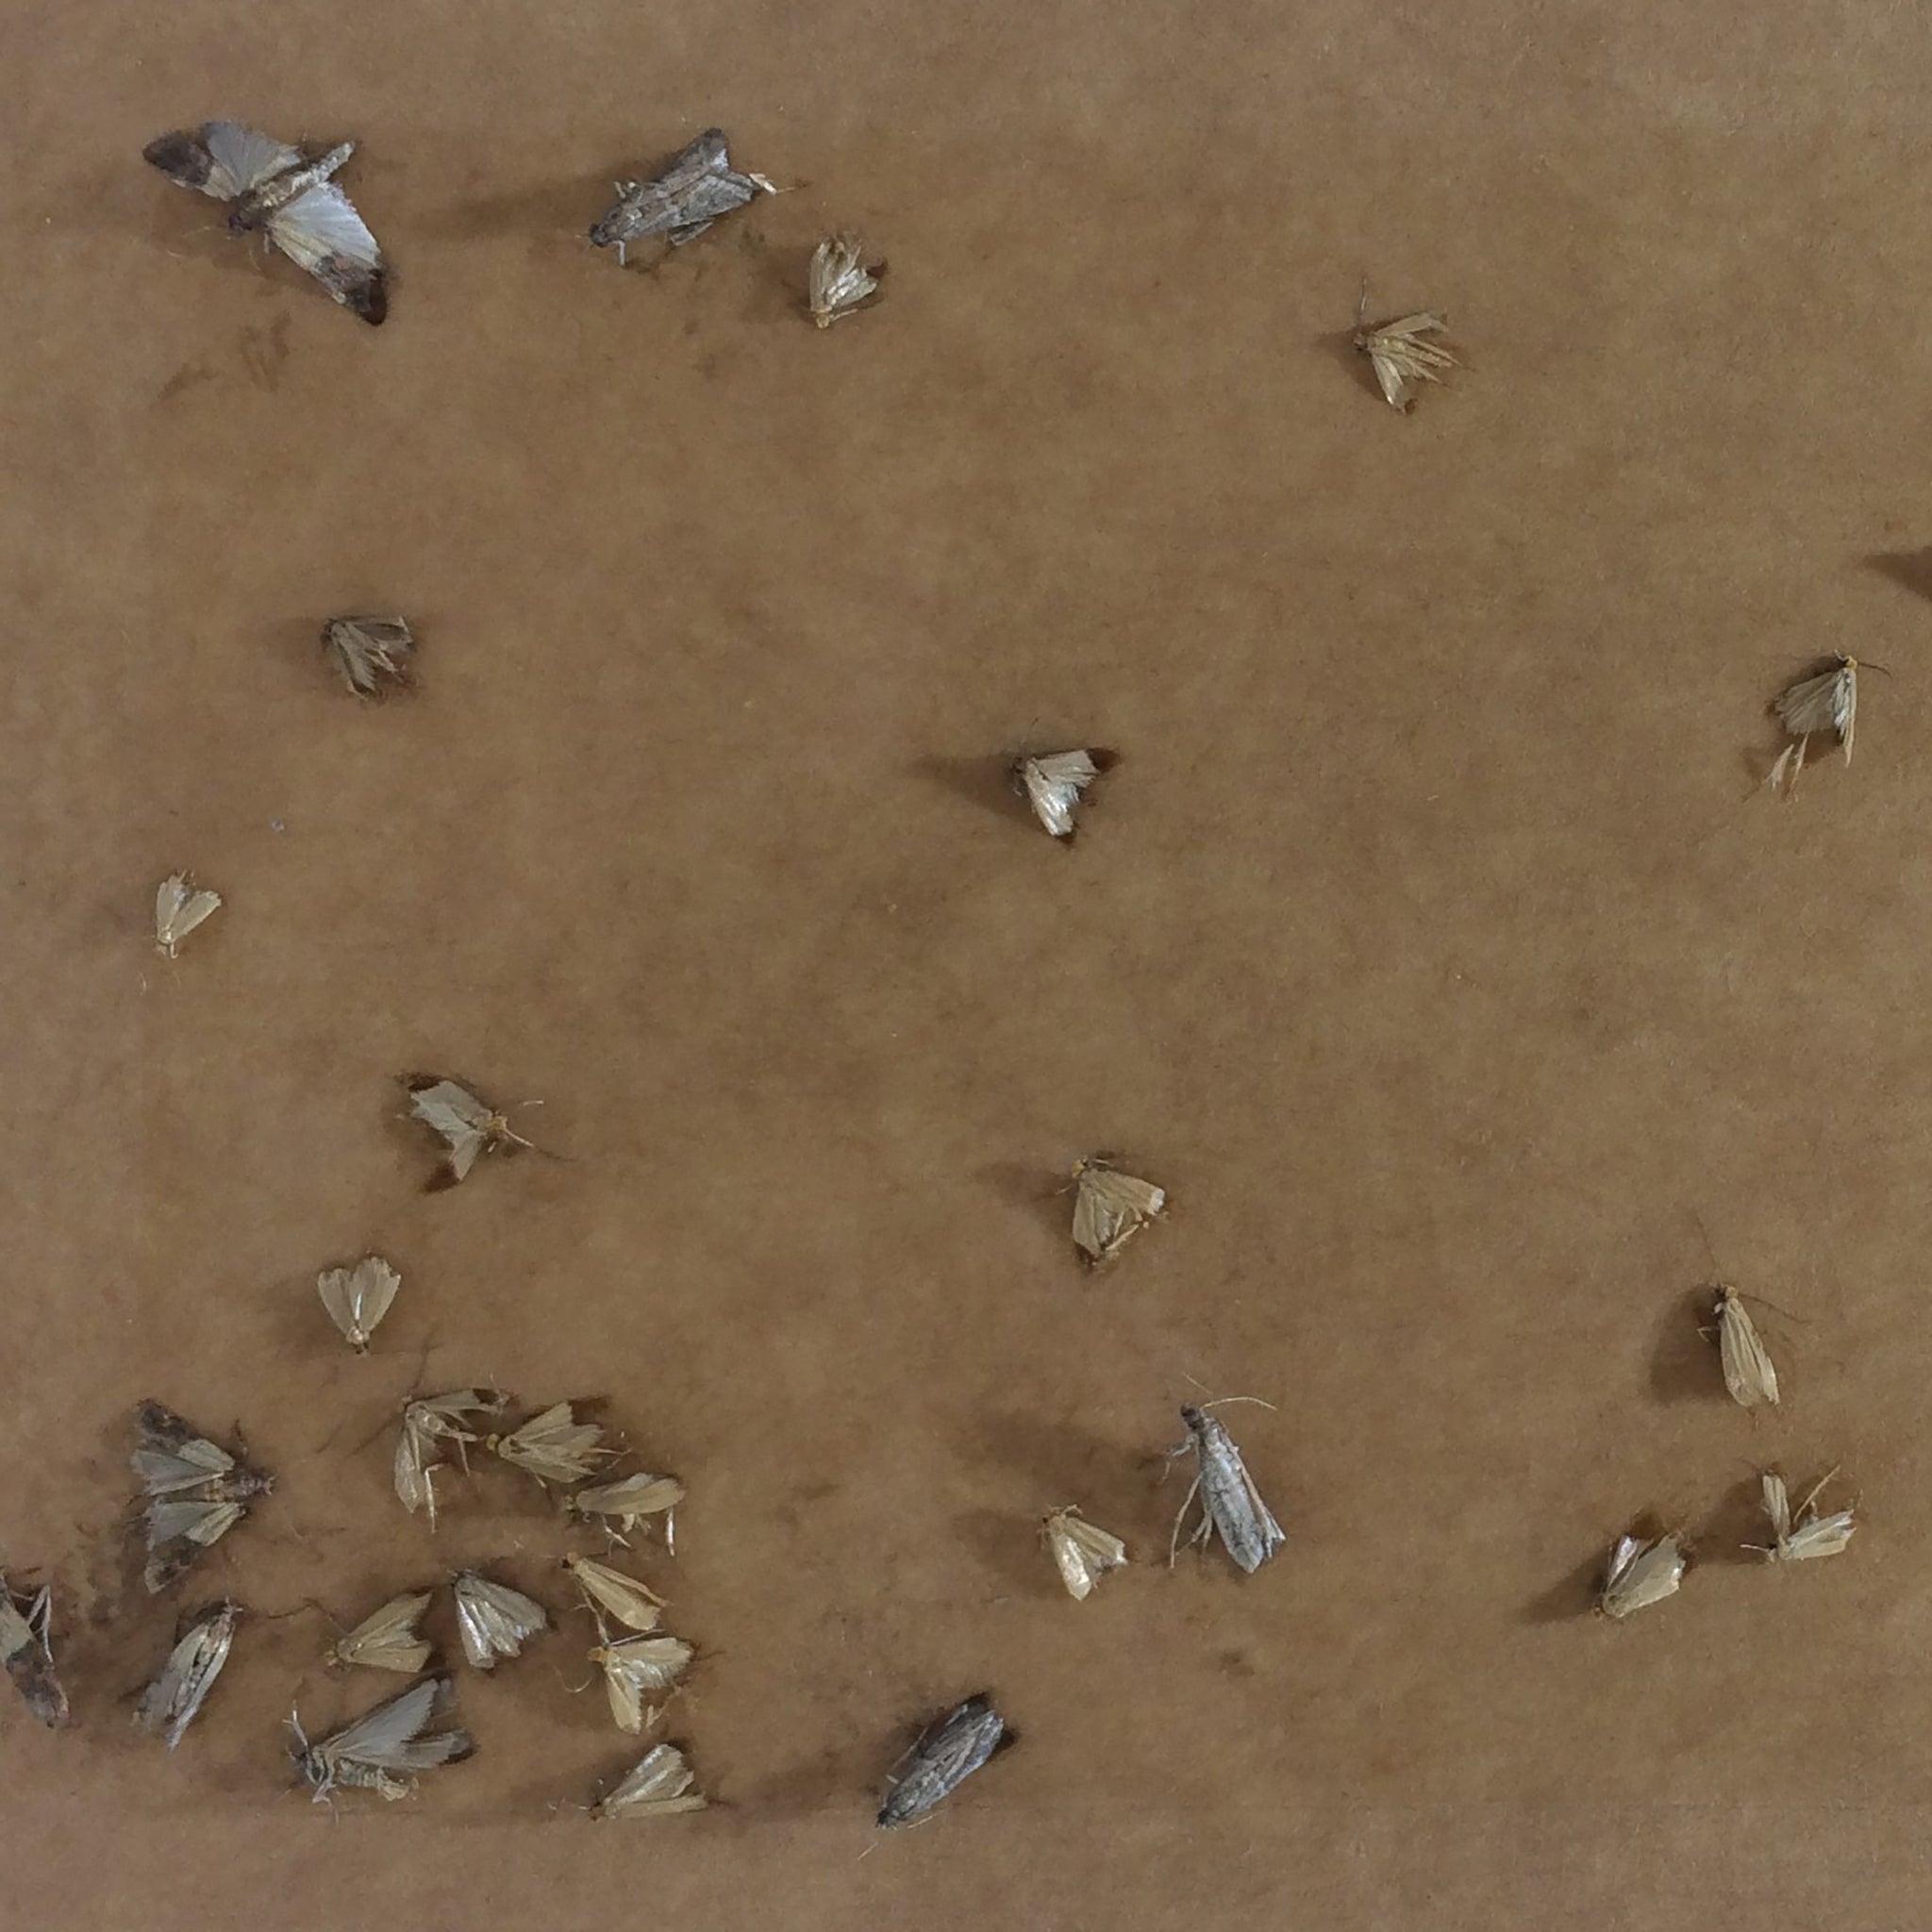 a collection of clothes moths stuck to a sticky pheromone trap